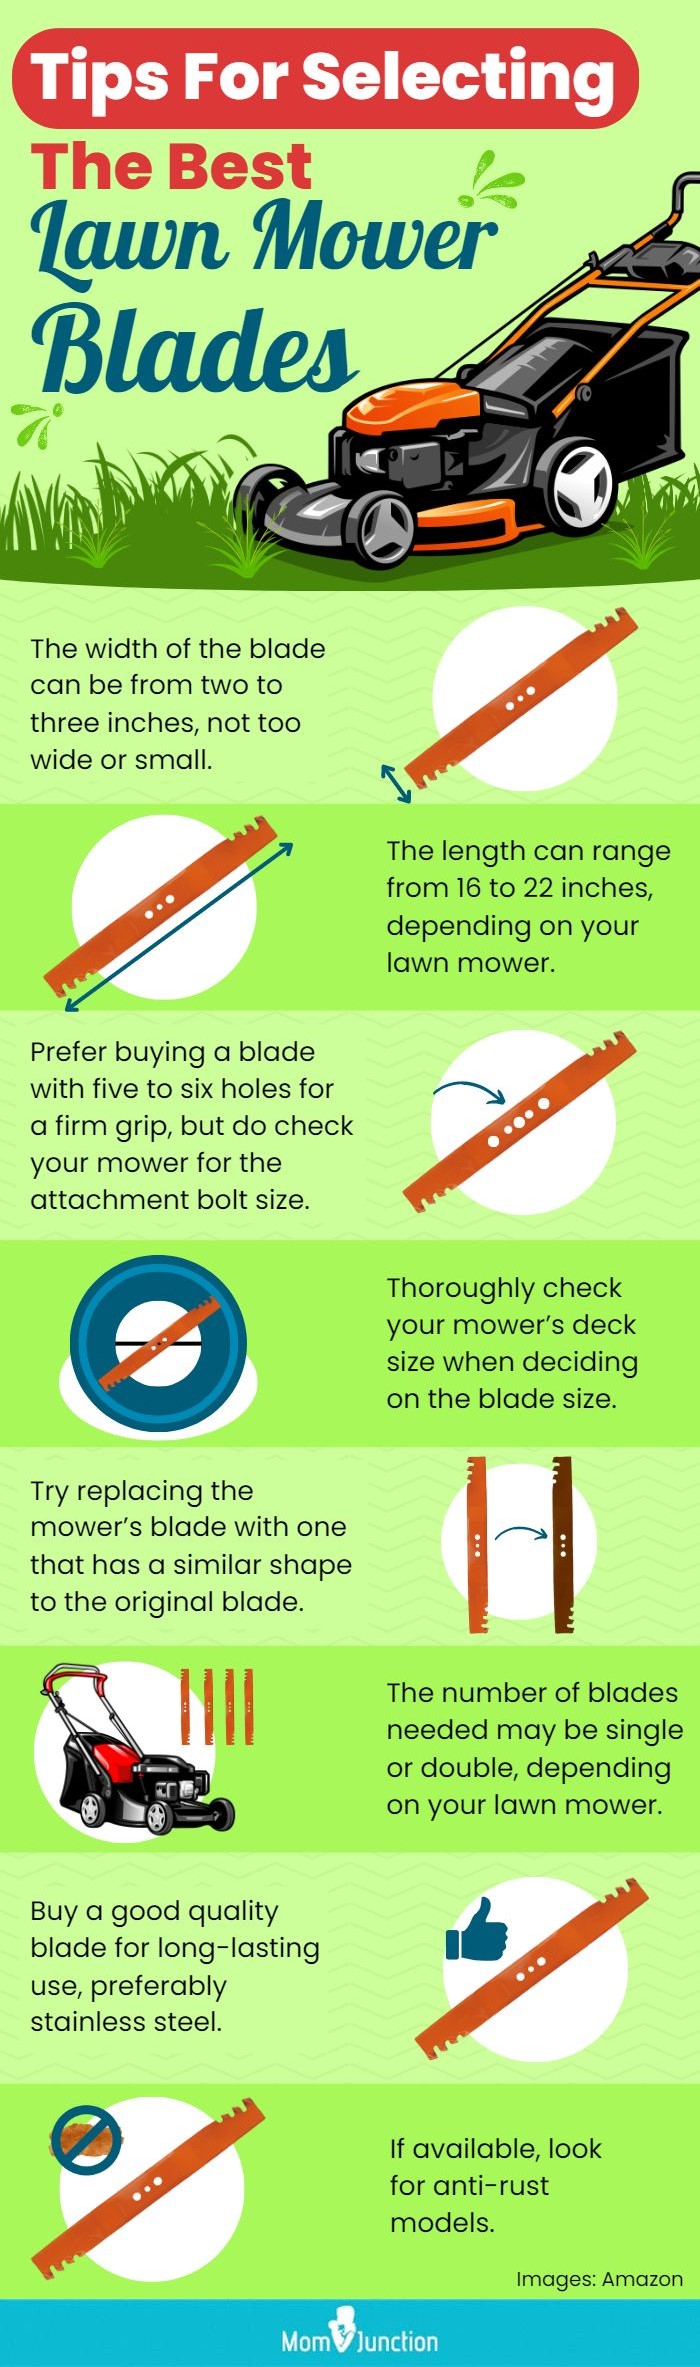 Tips For Selecting The Best Lawn Mower Blades (infographic)